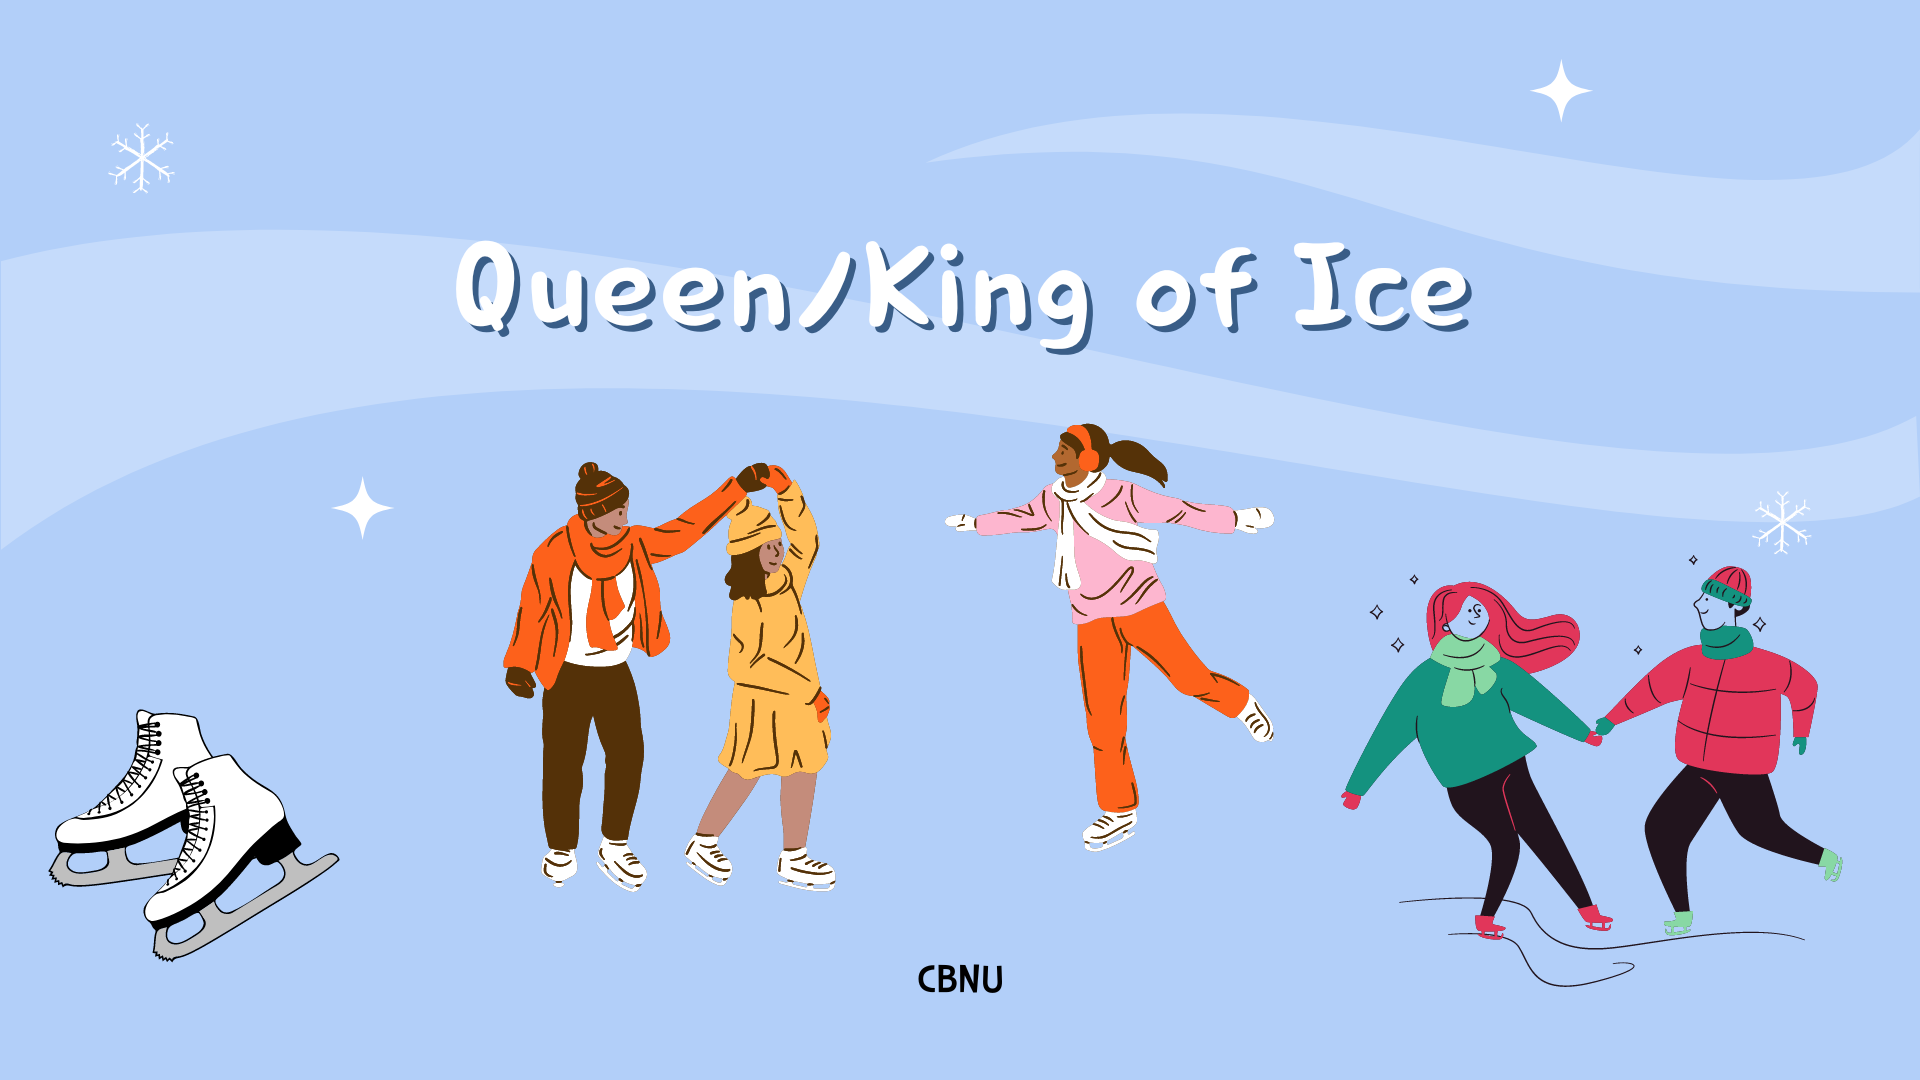 [2023 Spring] Queen/King of Ice_Video